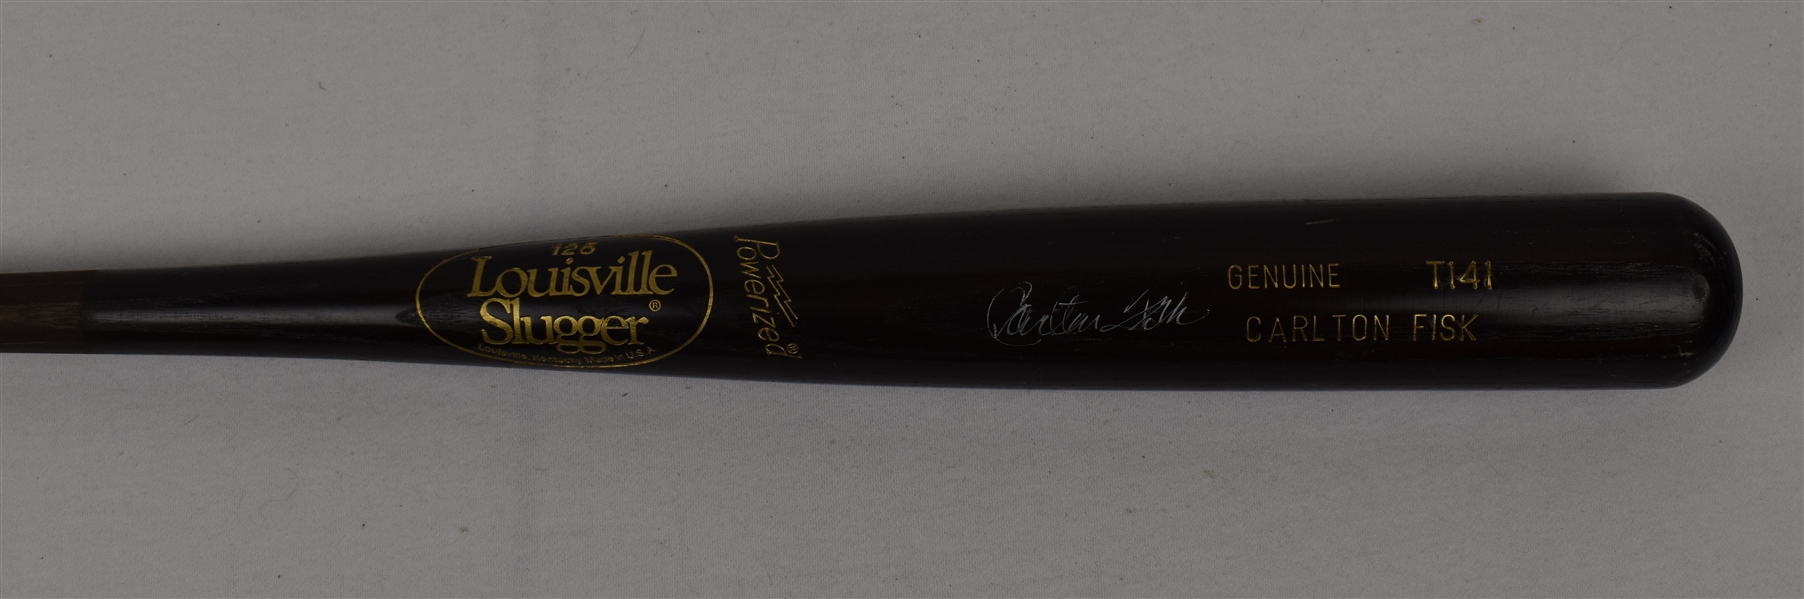 Carlton Fisk c. 1986-89 Chicago White Sox Game Used Autographed Bat